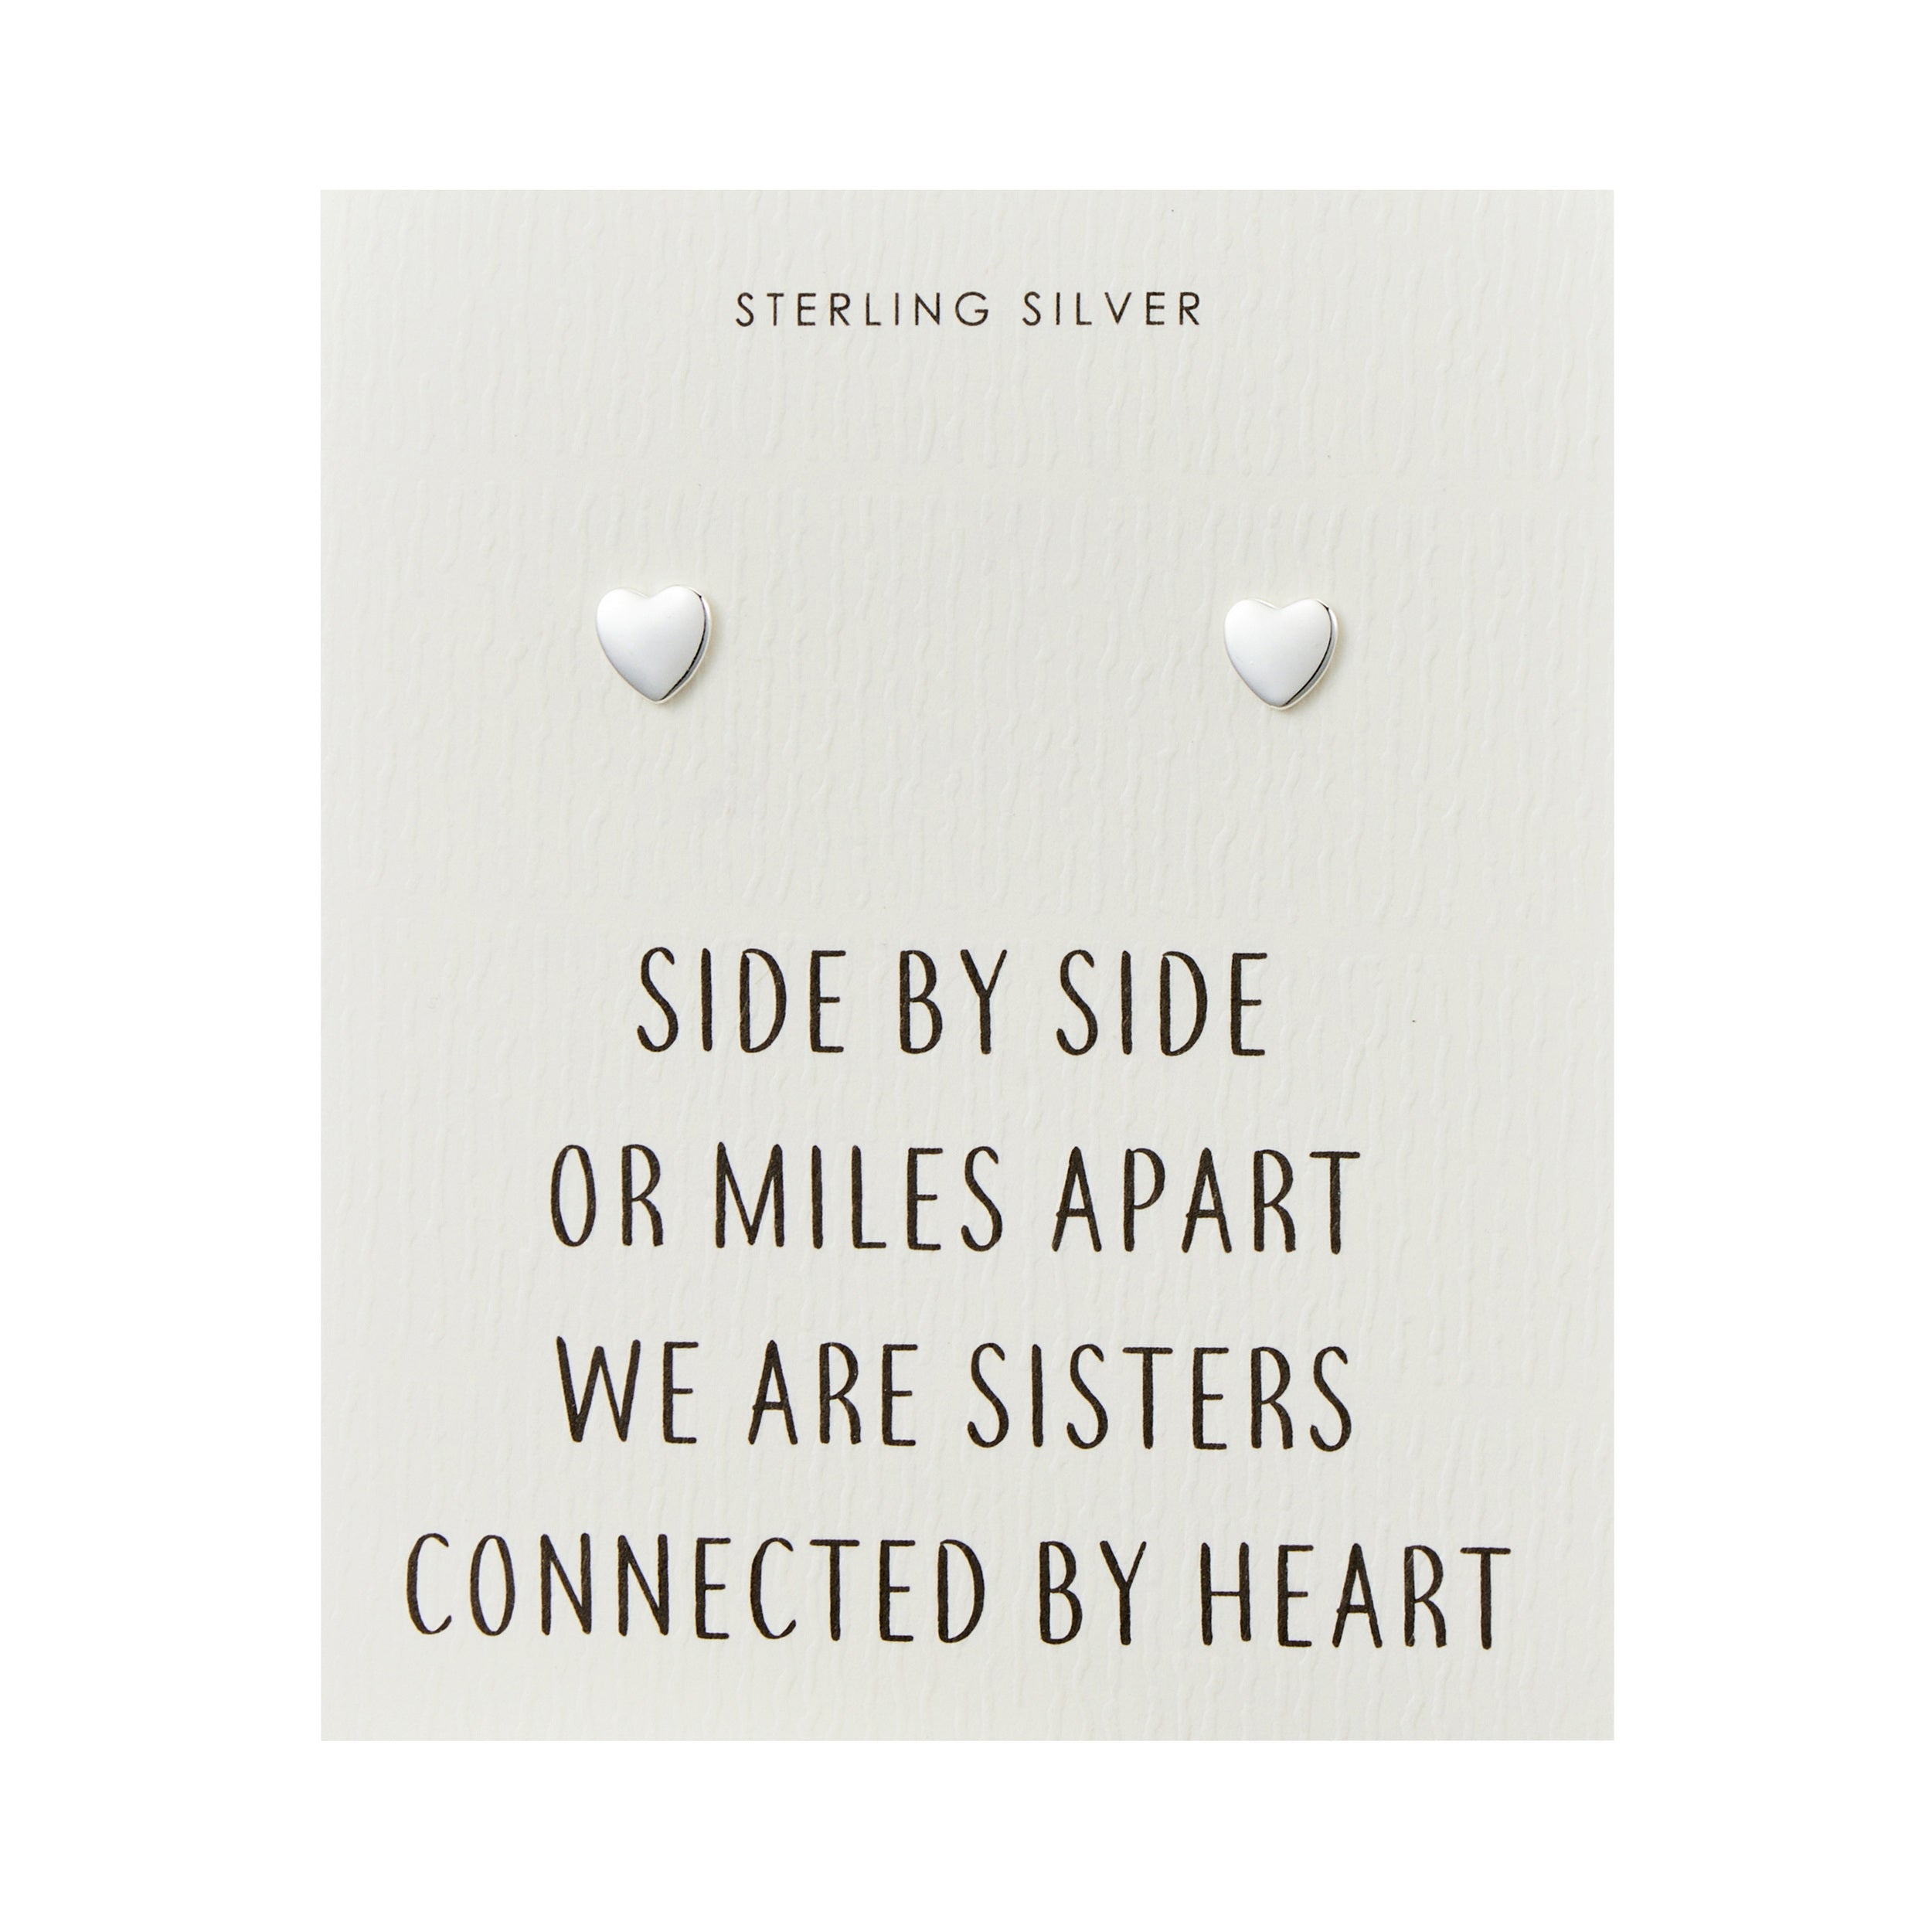 Sterling Silver Sister Heart Earrings with Quote Card